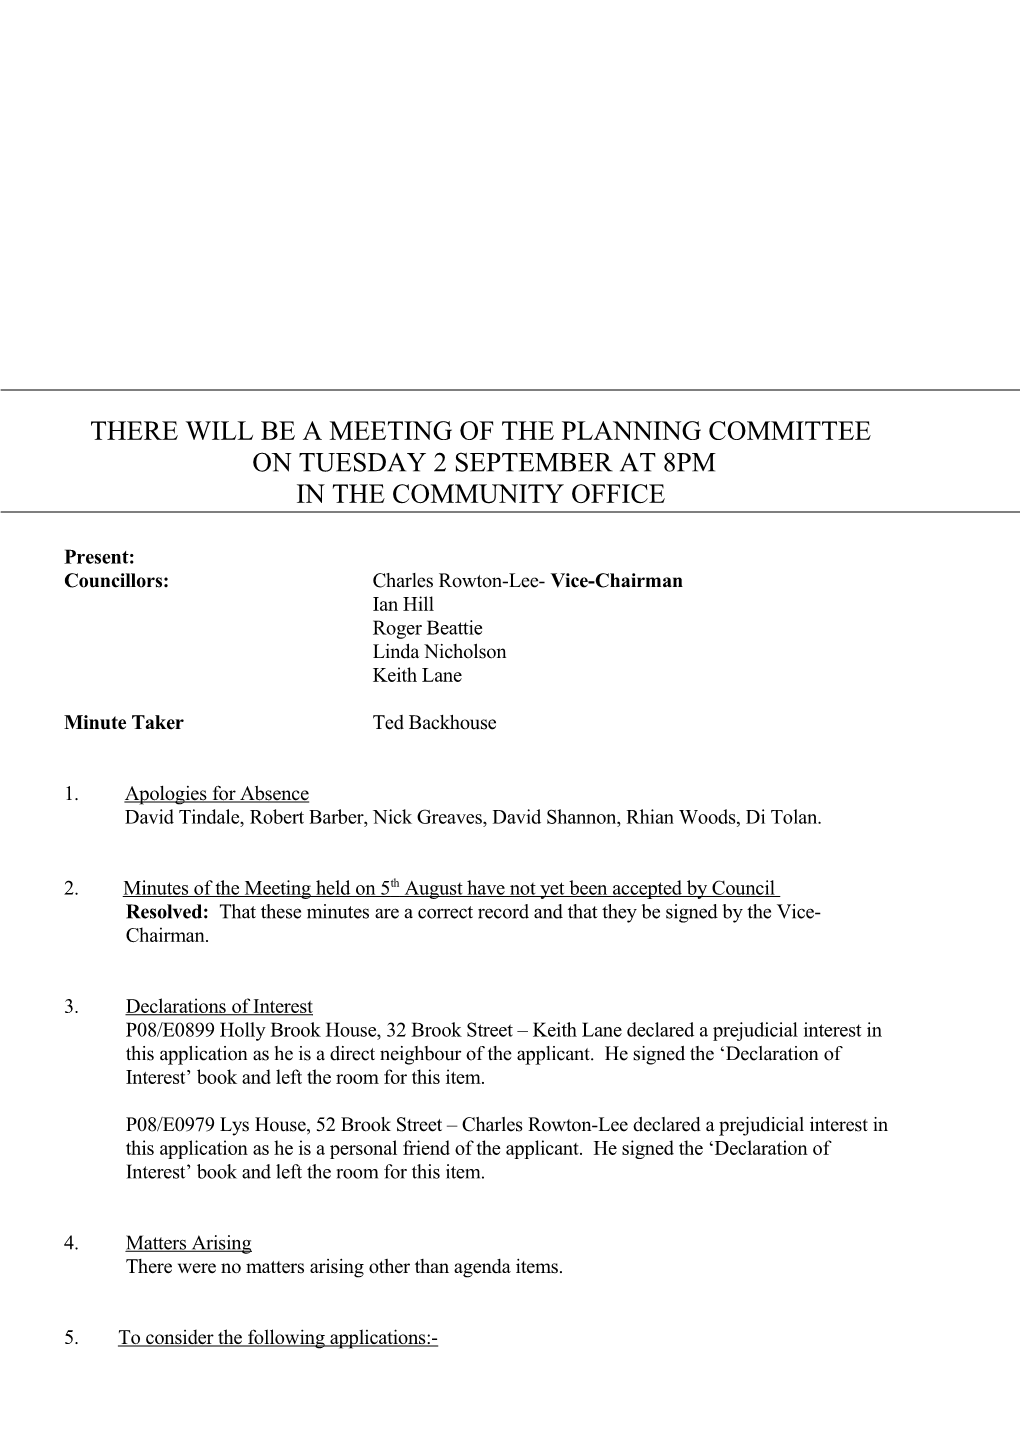 There Will Be a Meeting of the Planning Committee